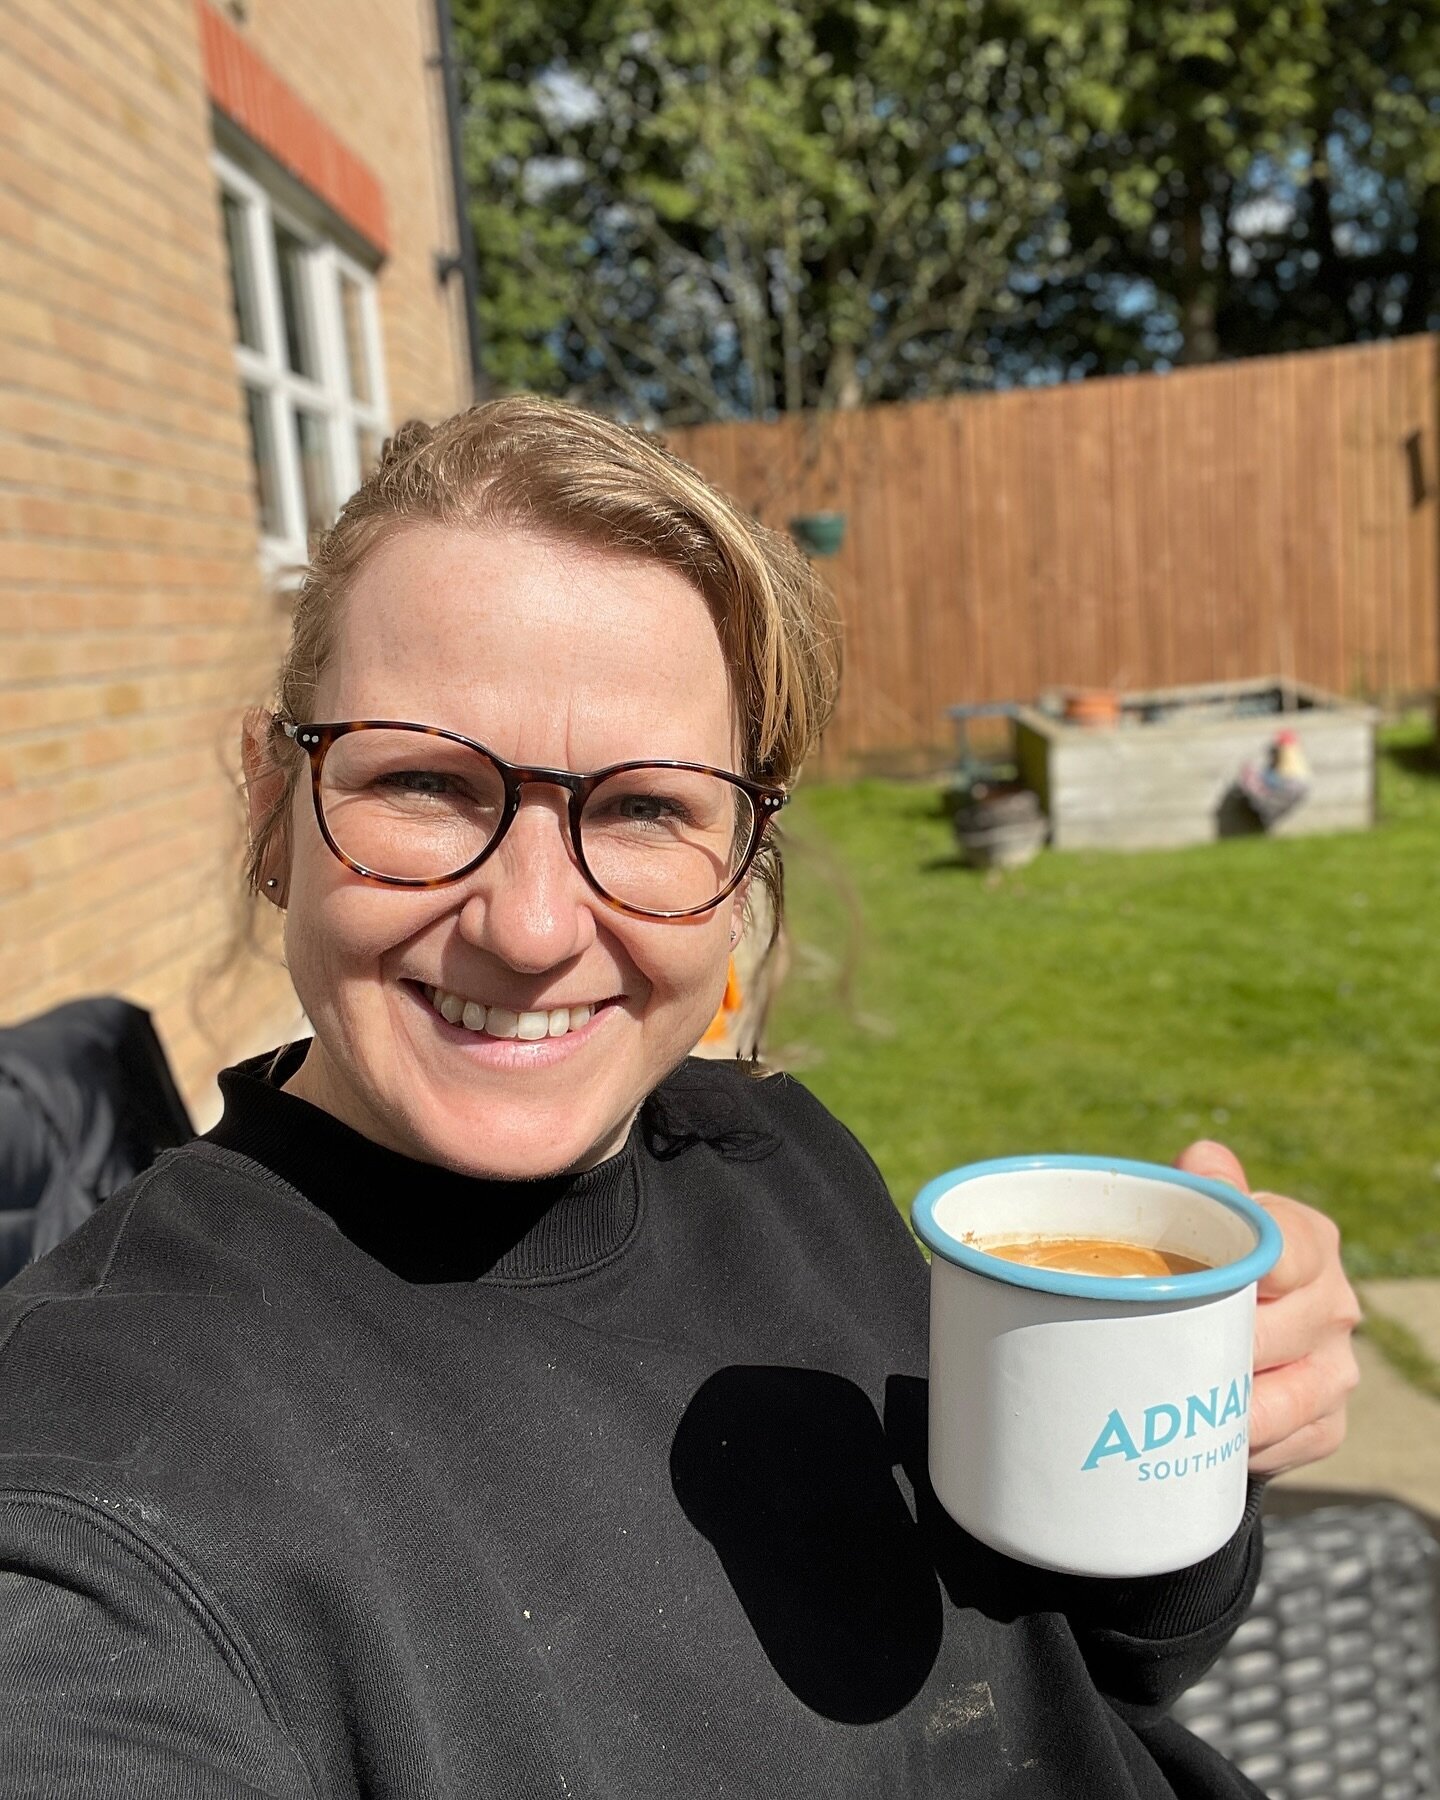 👋 Hello spring ☀️ I don't think I knew how much I needed you until I spent all day outside, sun on my face, coffee in the garden☕️ garden tidied up 🧑&zwj;🌾 I feel so much better 

Anyone else? 

#spring #easterweekend #sunonyourface #hertfordshire